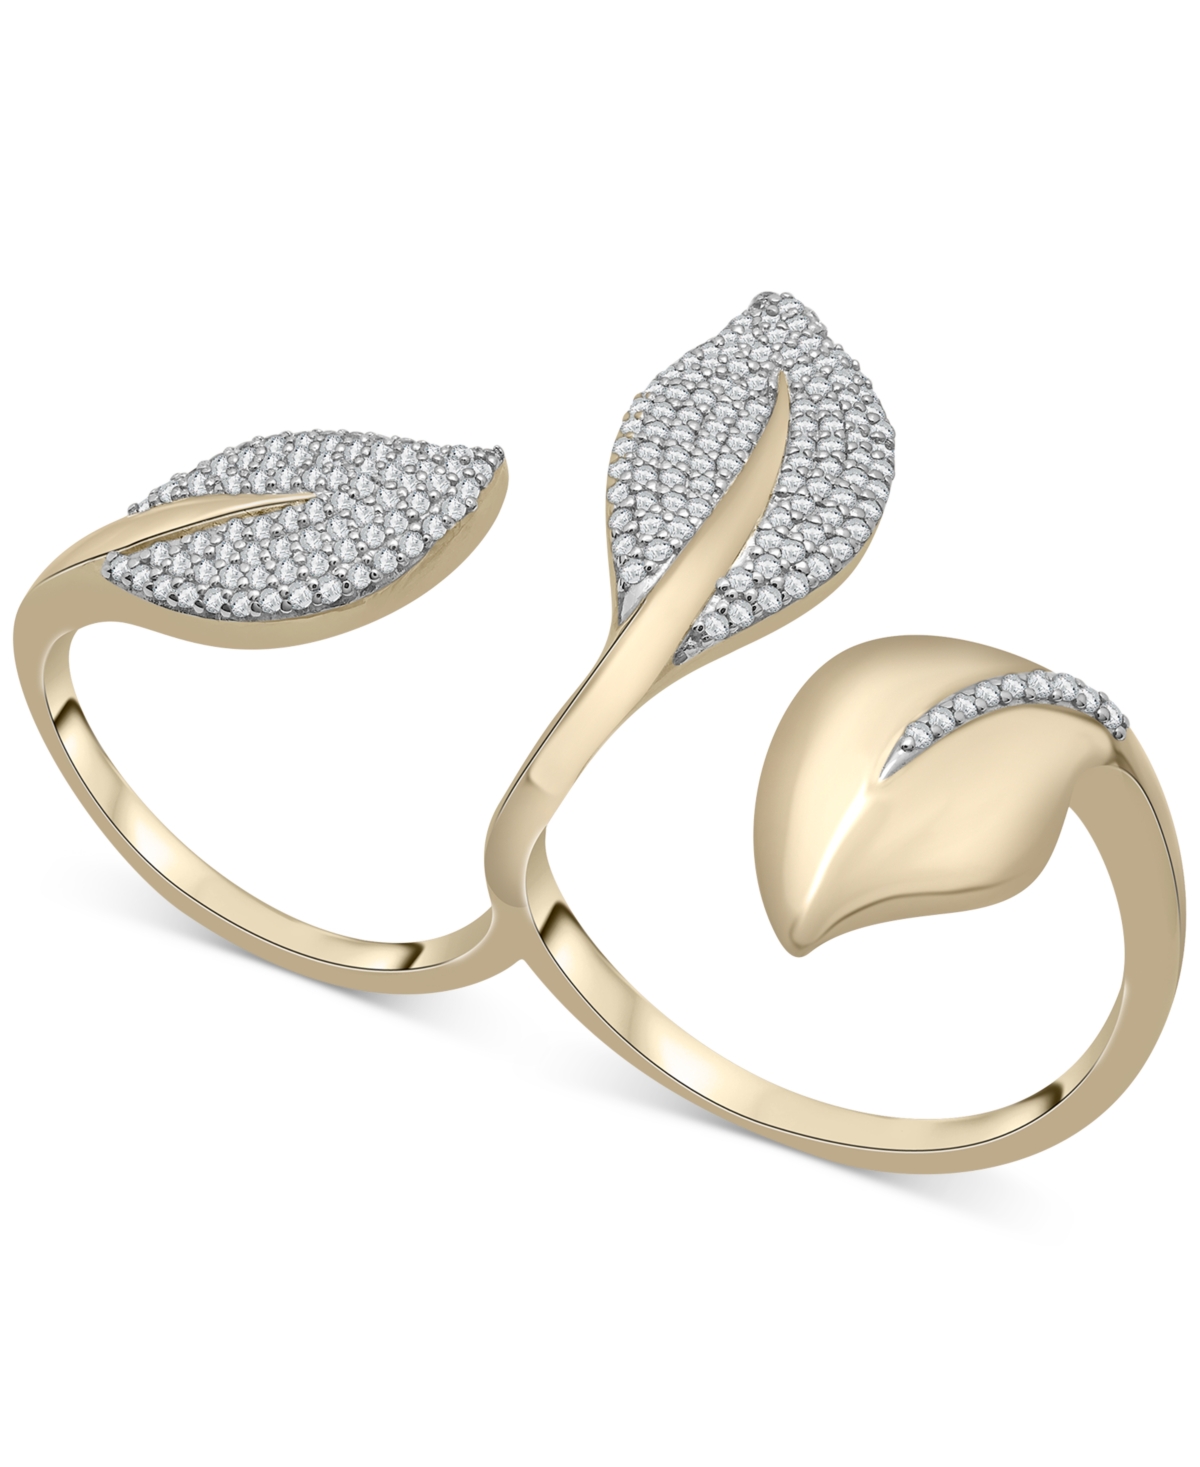 Diamond Pave Leaf Open Cuff Double Ring (1/2 ct. t.w.) in 10k White or Yellow Gold, Created for Macy's - Yellow Gold